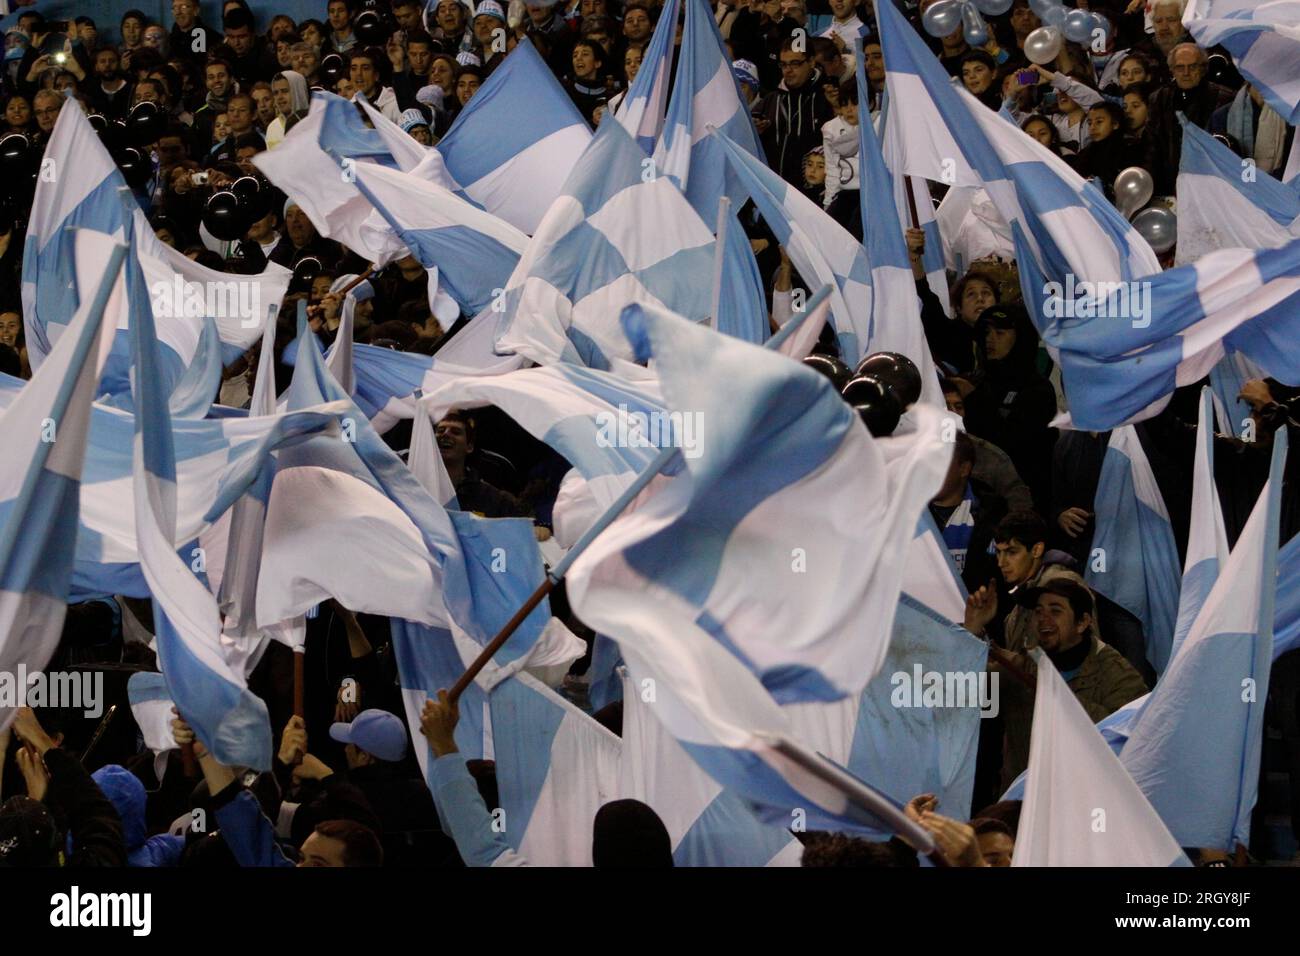 Avellaneda, Buenos Aires, Argentina. 21th. Juni 2013. Racing Club fans hold a wake to celebrate the relegation of their rival Independiente during the Stock Photo